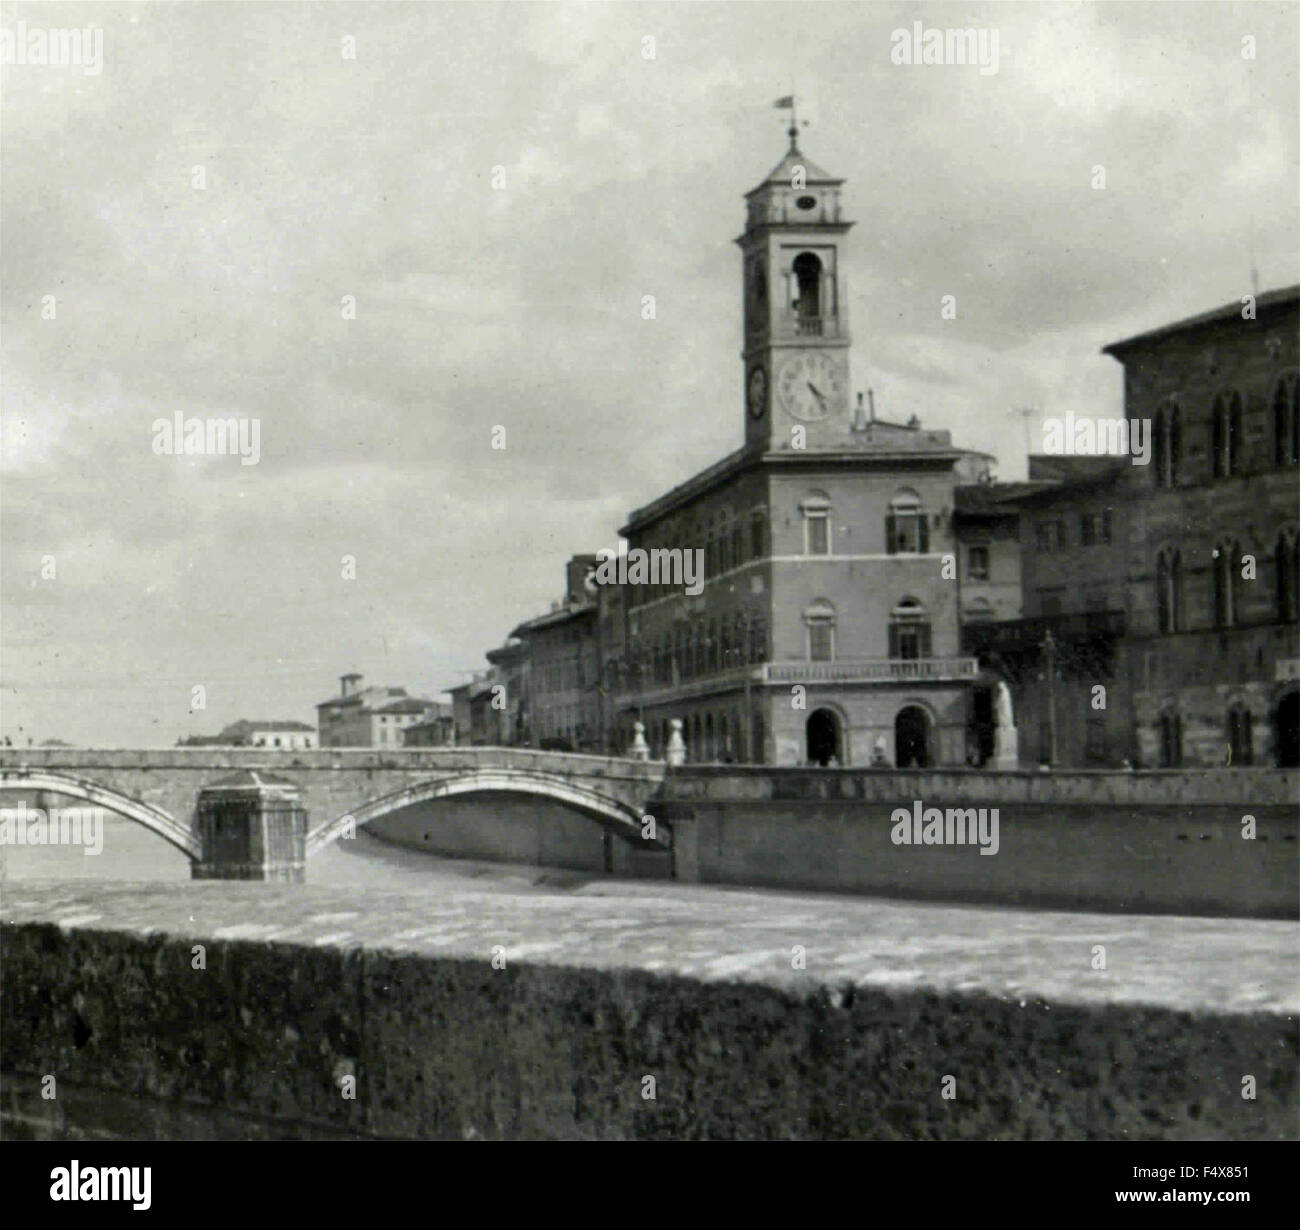 The Middle Bridge over the River Arno in Florence, Italy Stock Photo